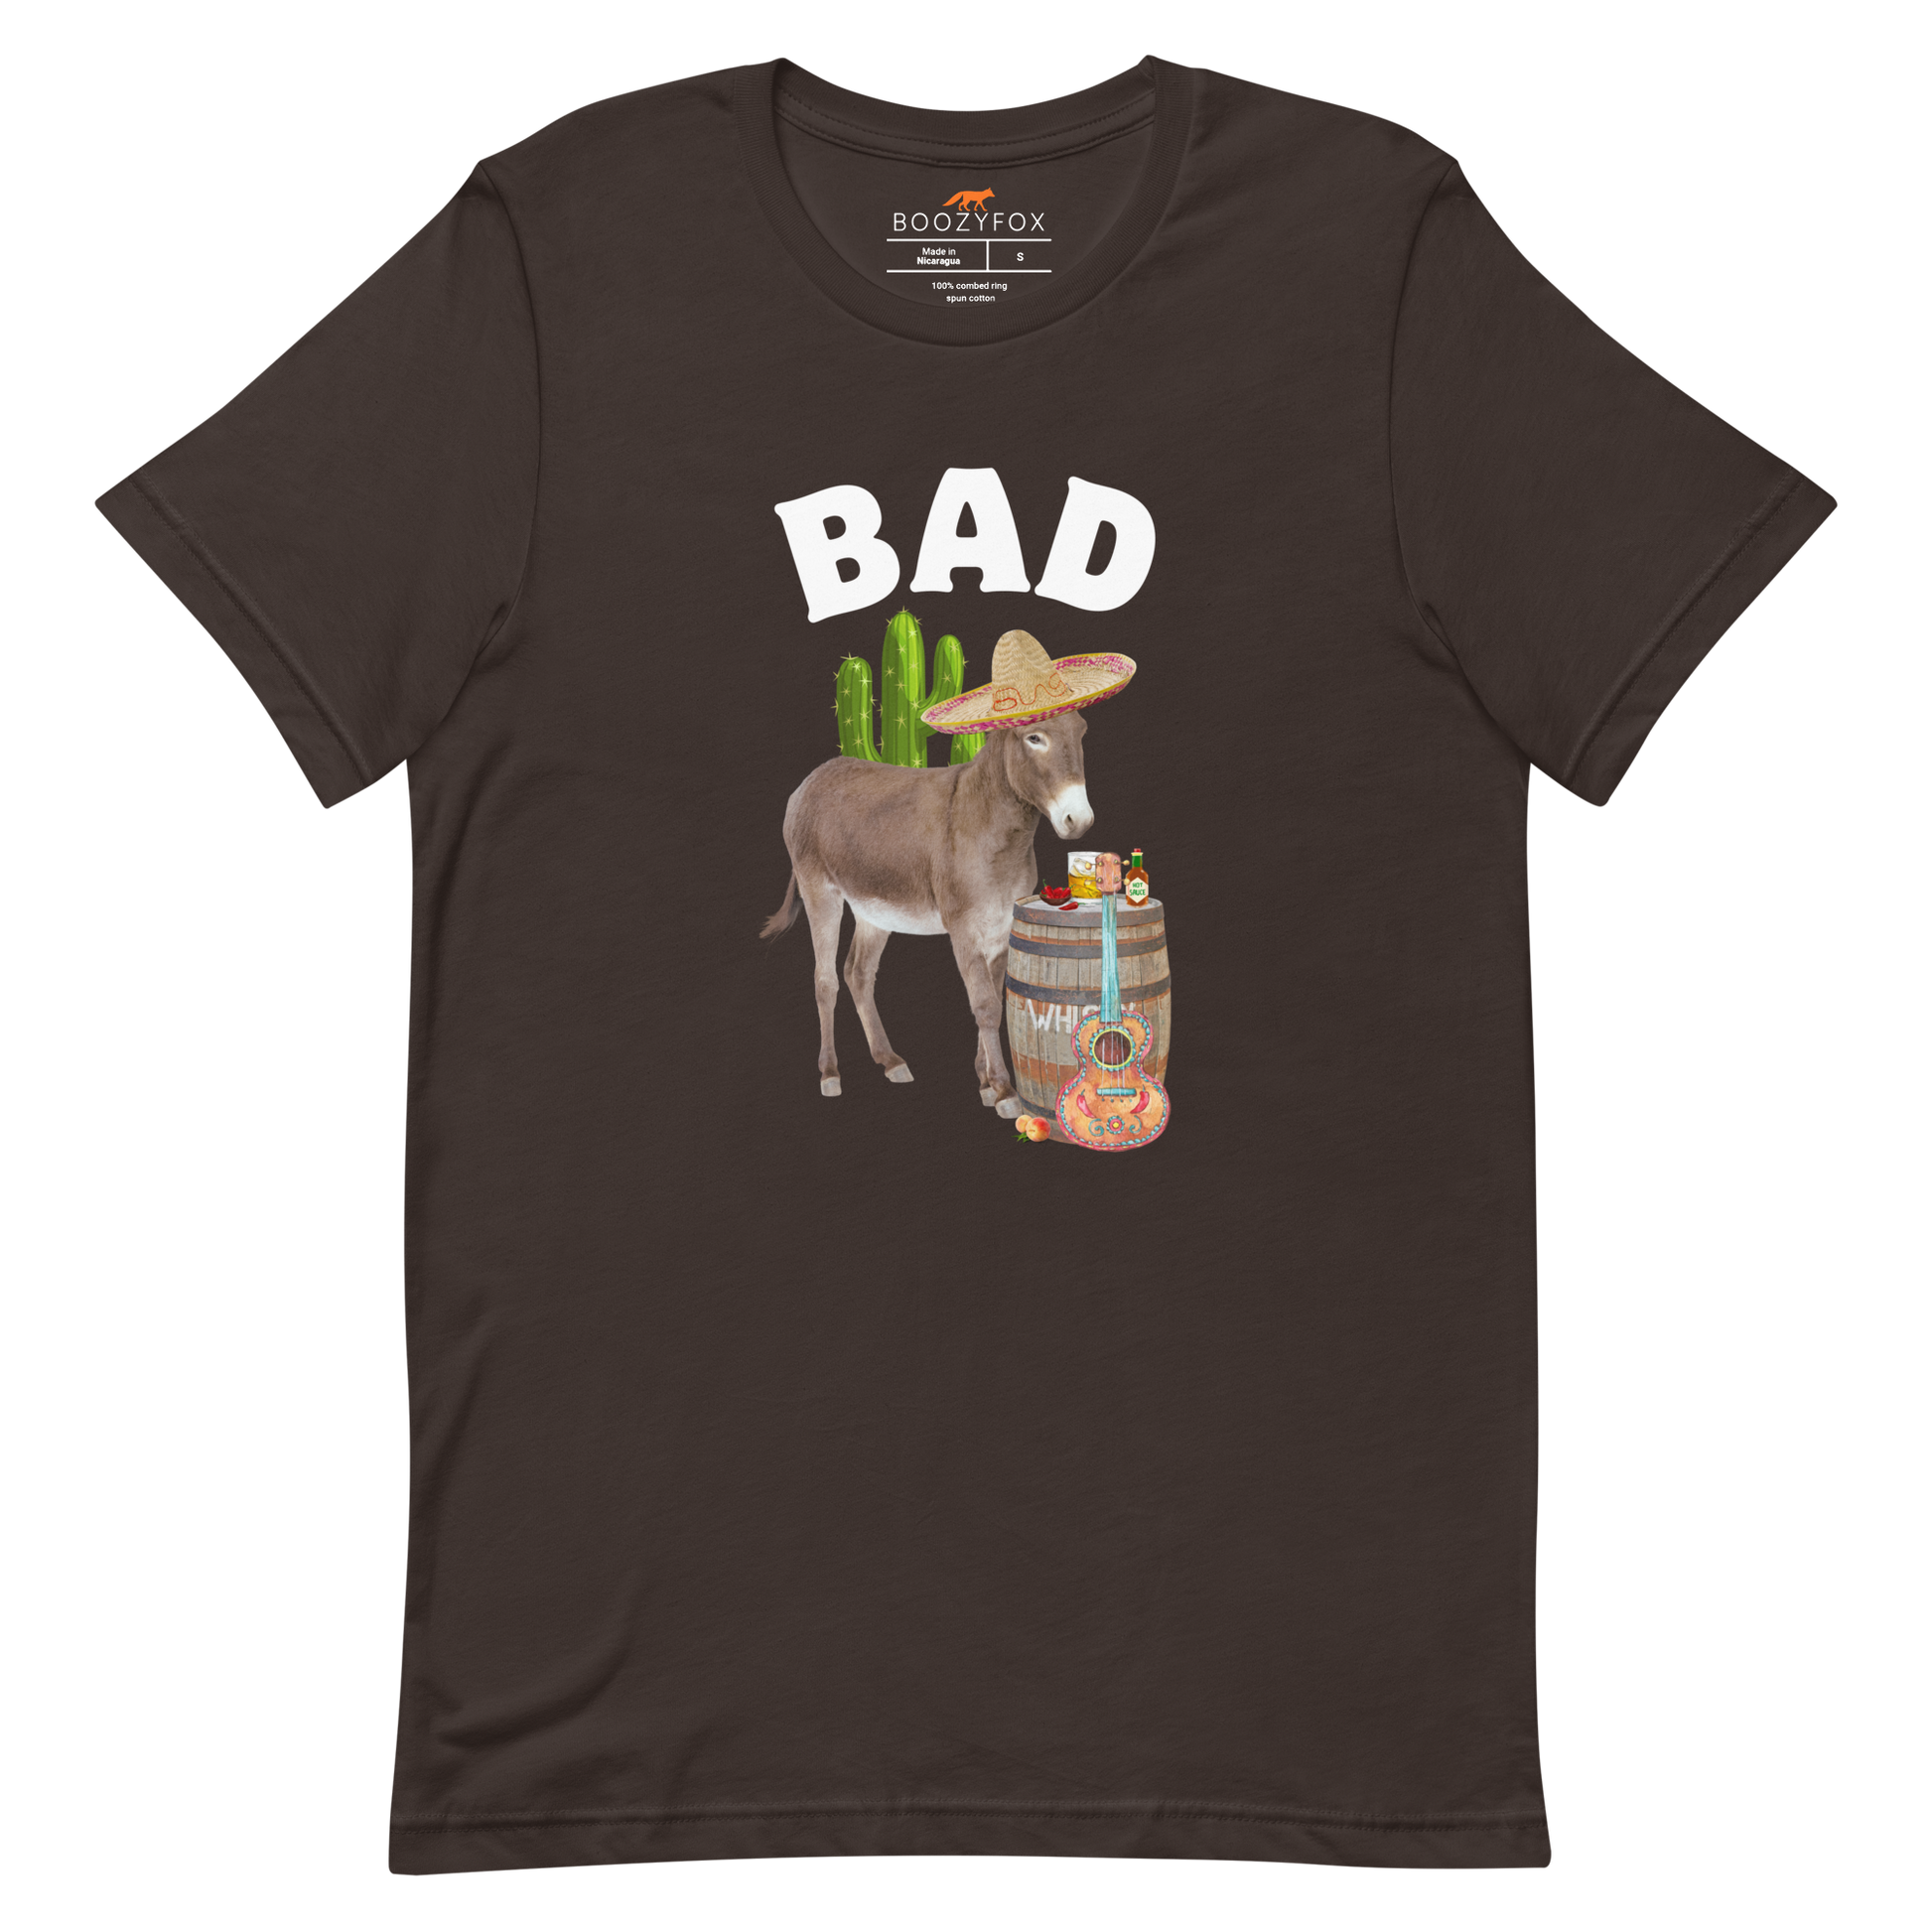 Brown Premium Donkey Tee featuring a Funny Bad Ass Donkey graphic on the chest - Funny Graphic Bad Ass Donkey Tees - Boozy Fox